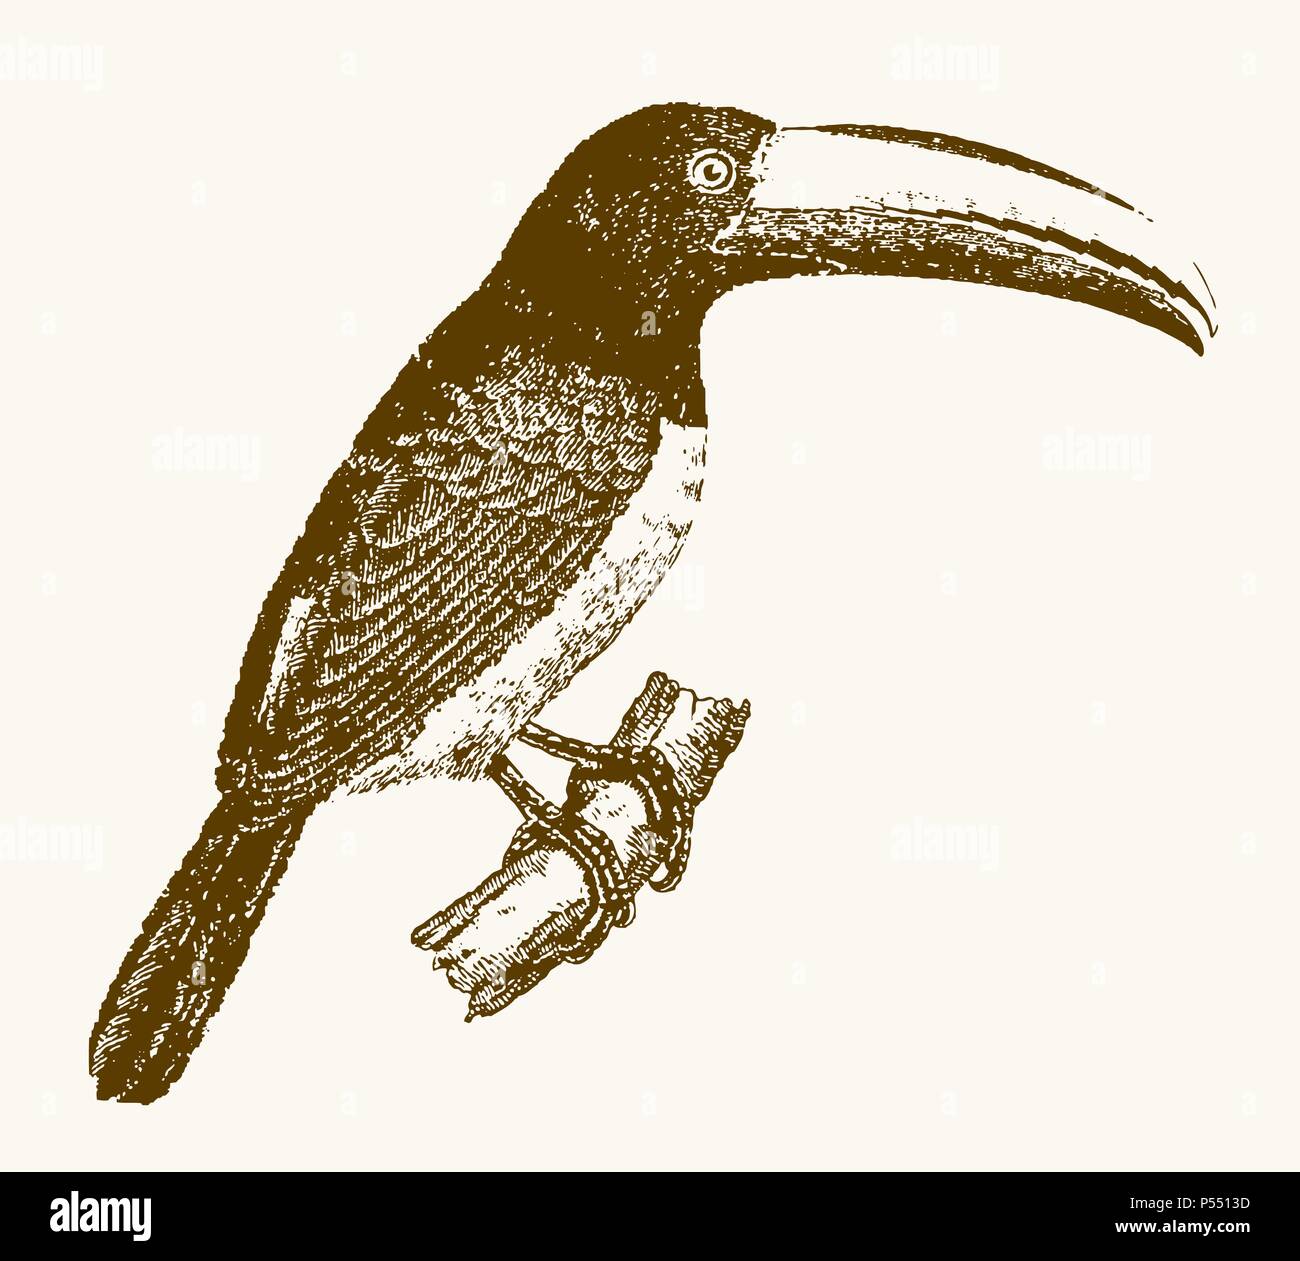 Aracari sitting on a branch. Illustration after a vintage engraving from the 19th century Stock Vector